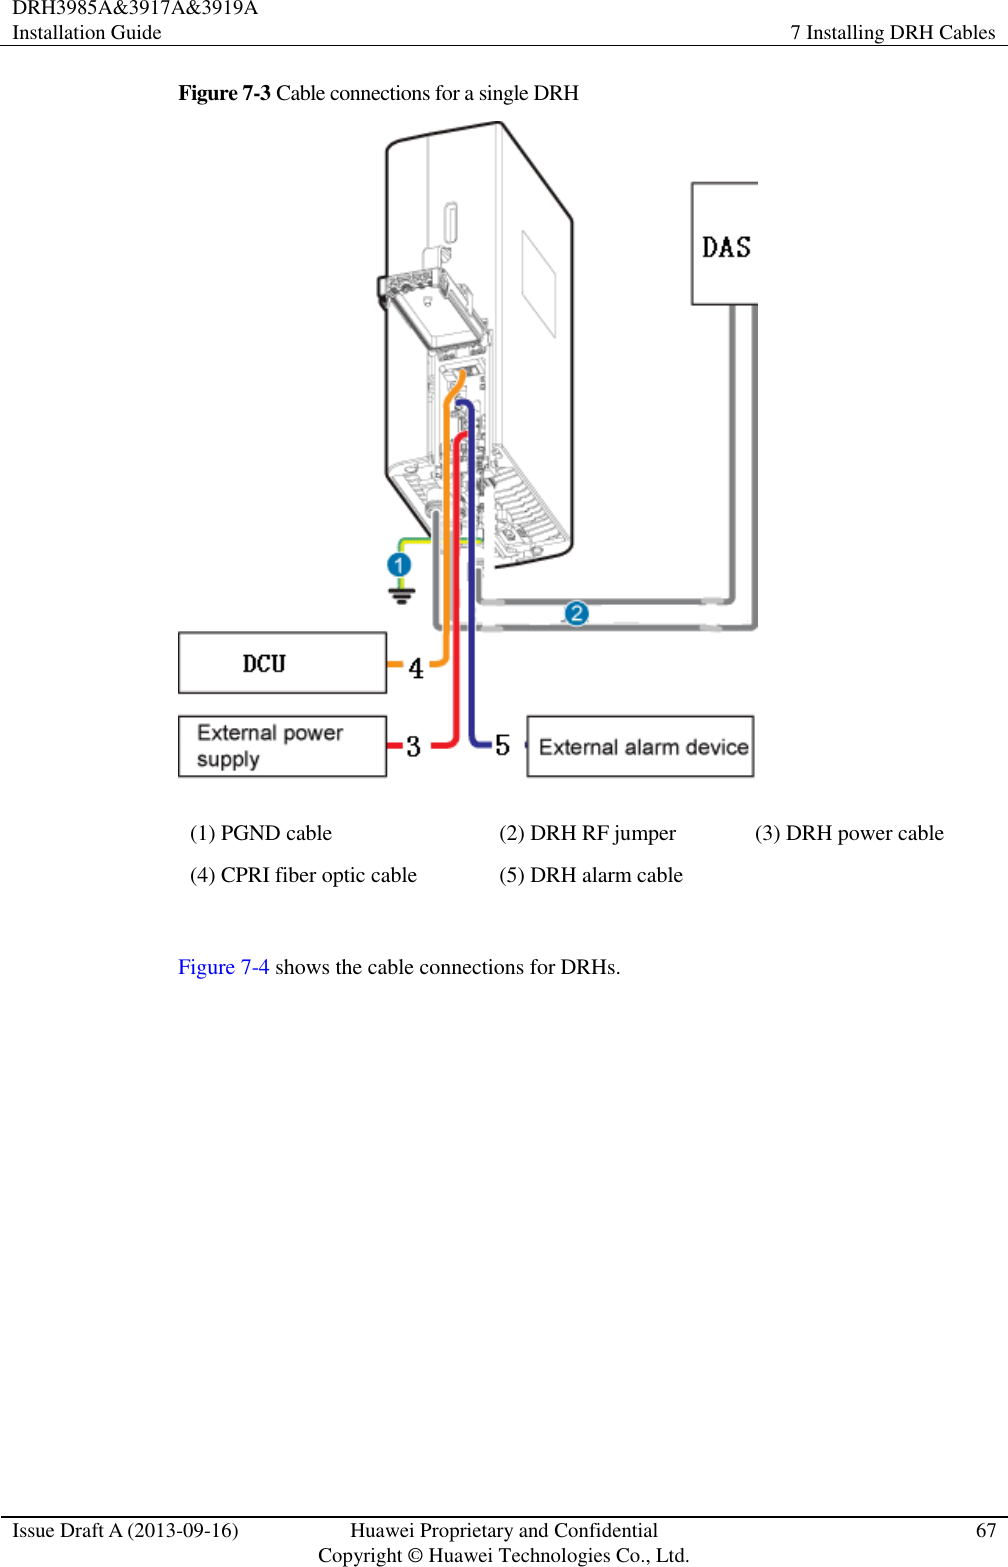 DRH3985A&amp;3917A&amp;3919A Installation Guide 7 Installing DRH Cables  Issue Draft A (2013-09-16) Huawei Proprietary and Confidential                                     Copyright © Huawei Technologies Co., Ltd. 67  Figure 7-3 Cable connections for a single DRH  (1) PGND cable (2) DRH RF jumper (3) DRH power cable (4) CPRI fiber optic cable (5) DRH alarm cable   Figure 7-4 shows the cable connections for DRHs. 